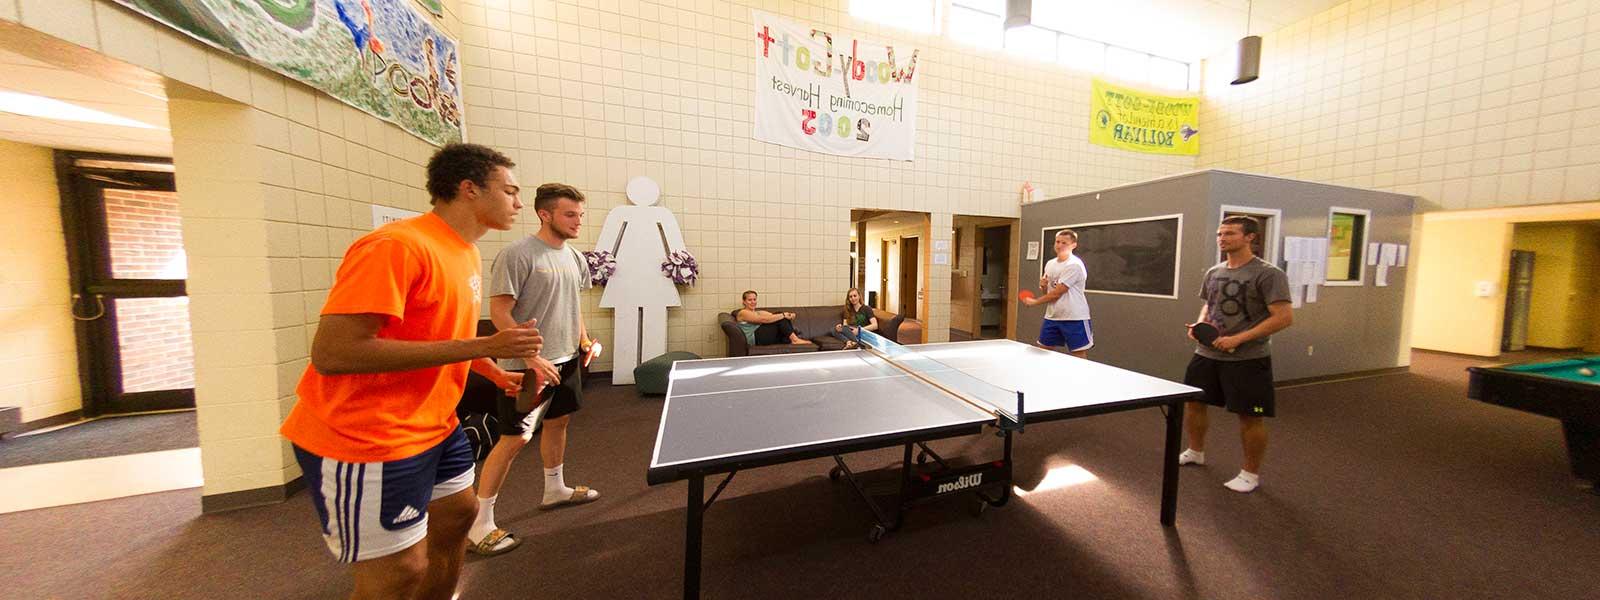 students playing ping-pong in dorm lobby